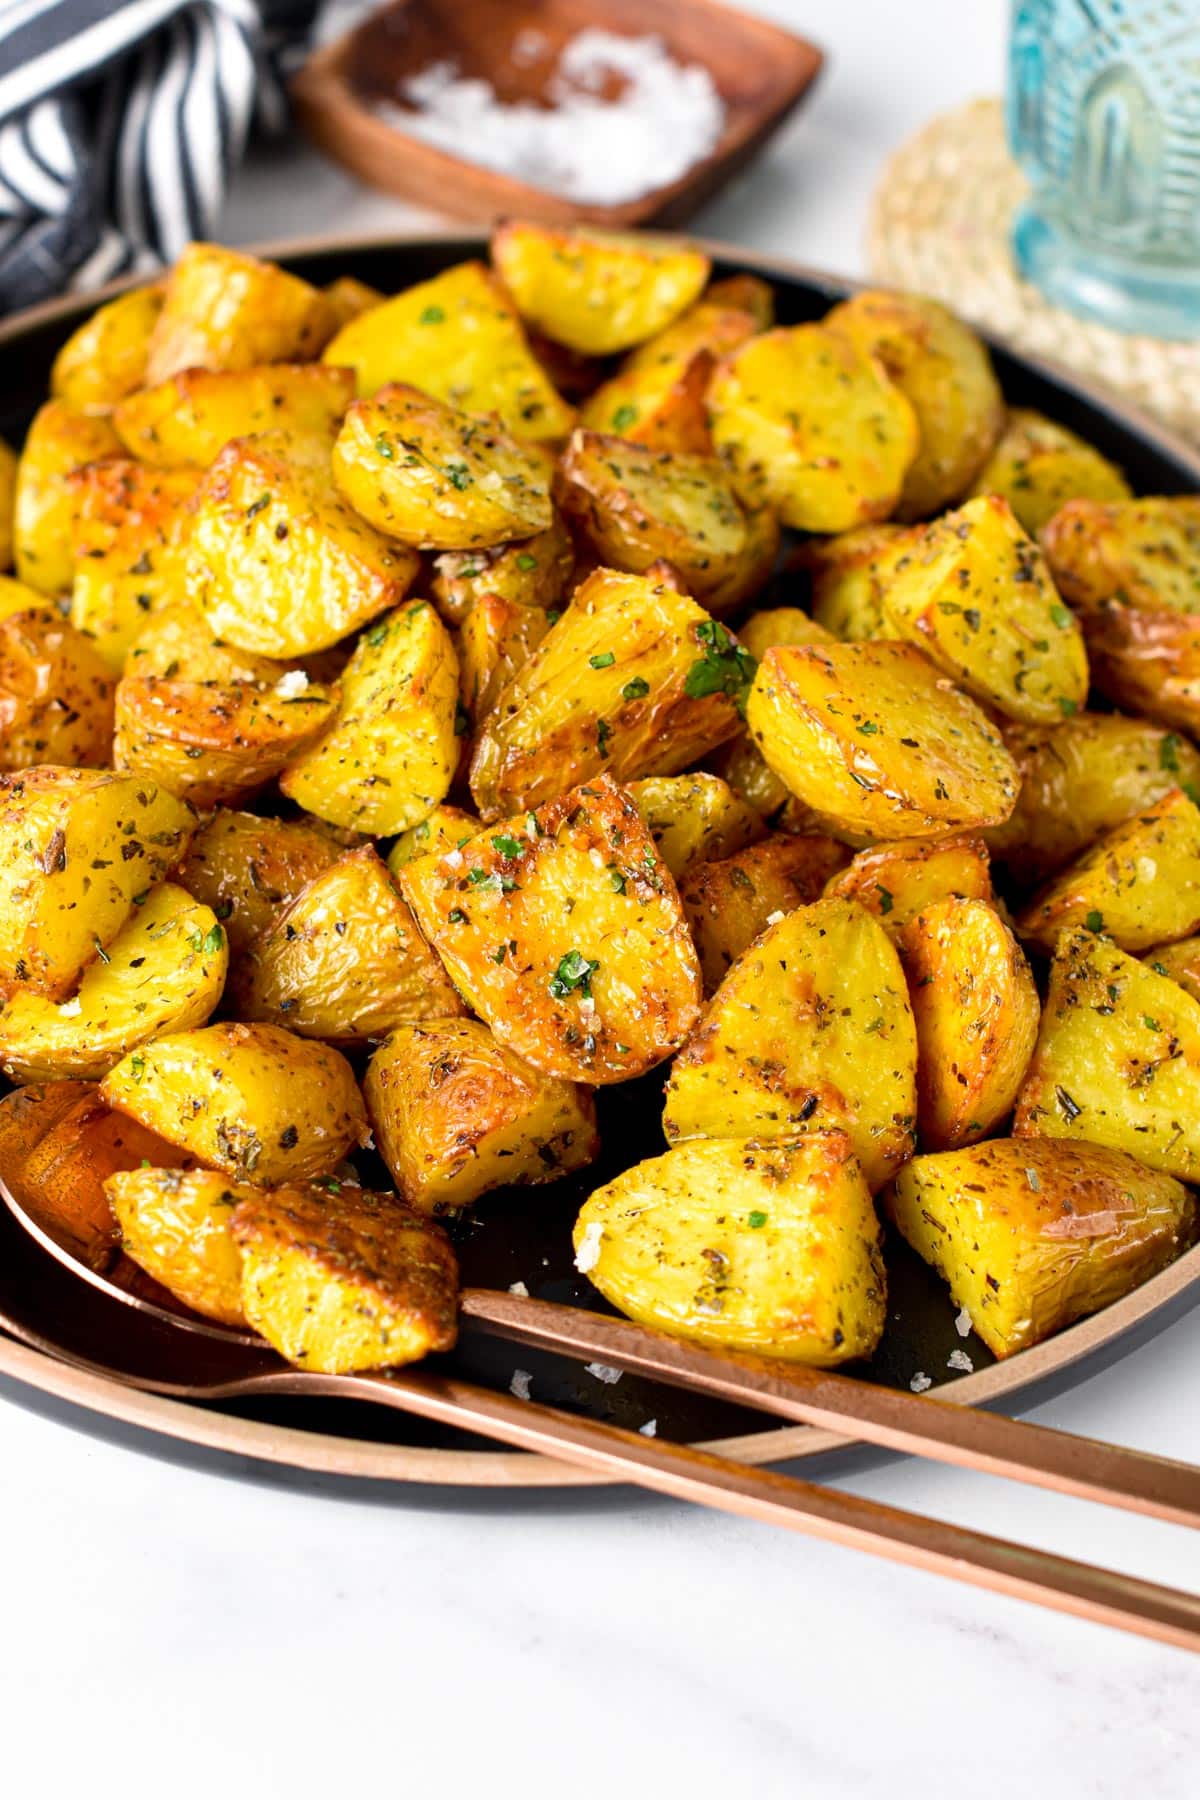 These Oven Roasted Potatoes are the most easy potato side dish ever ready in less than 40 minutes. Plus, this  is an allergy friendly side dish that tick all the dietary restriction as it's vegan, egg-free, nut-free and low-carb option provided.